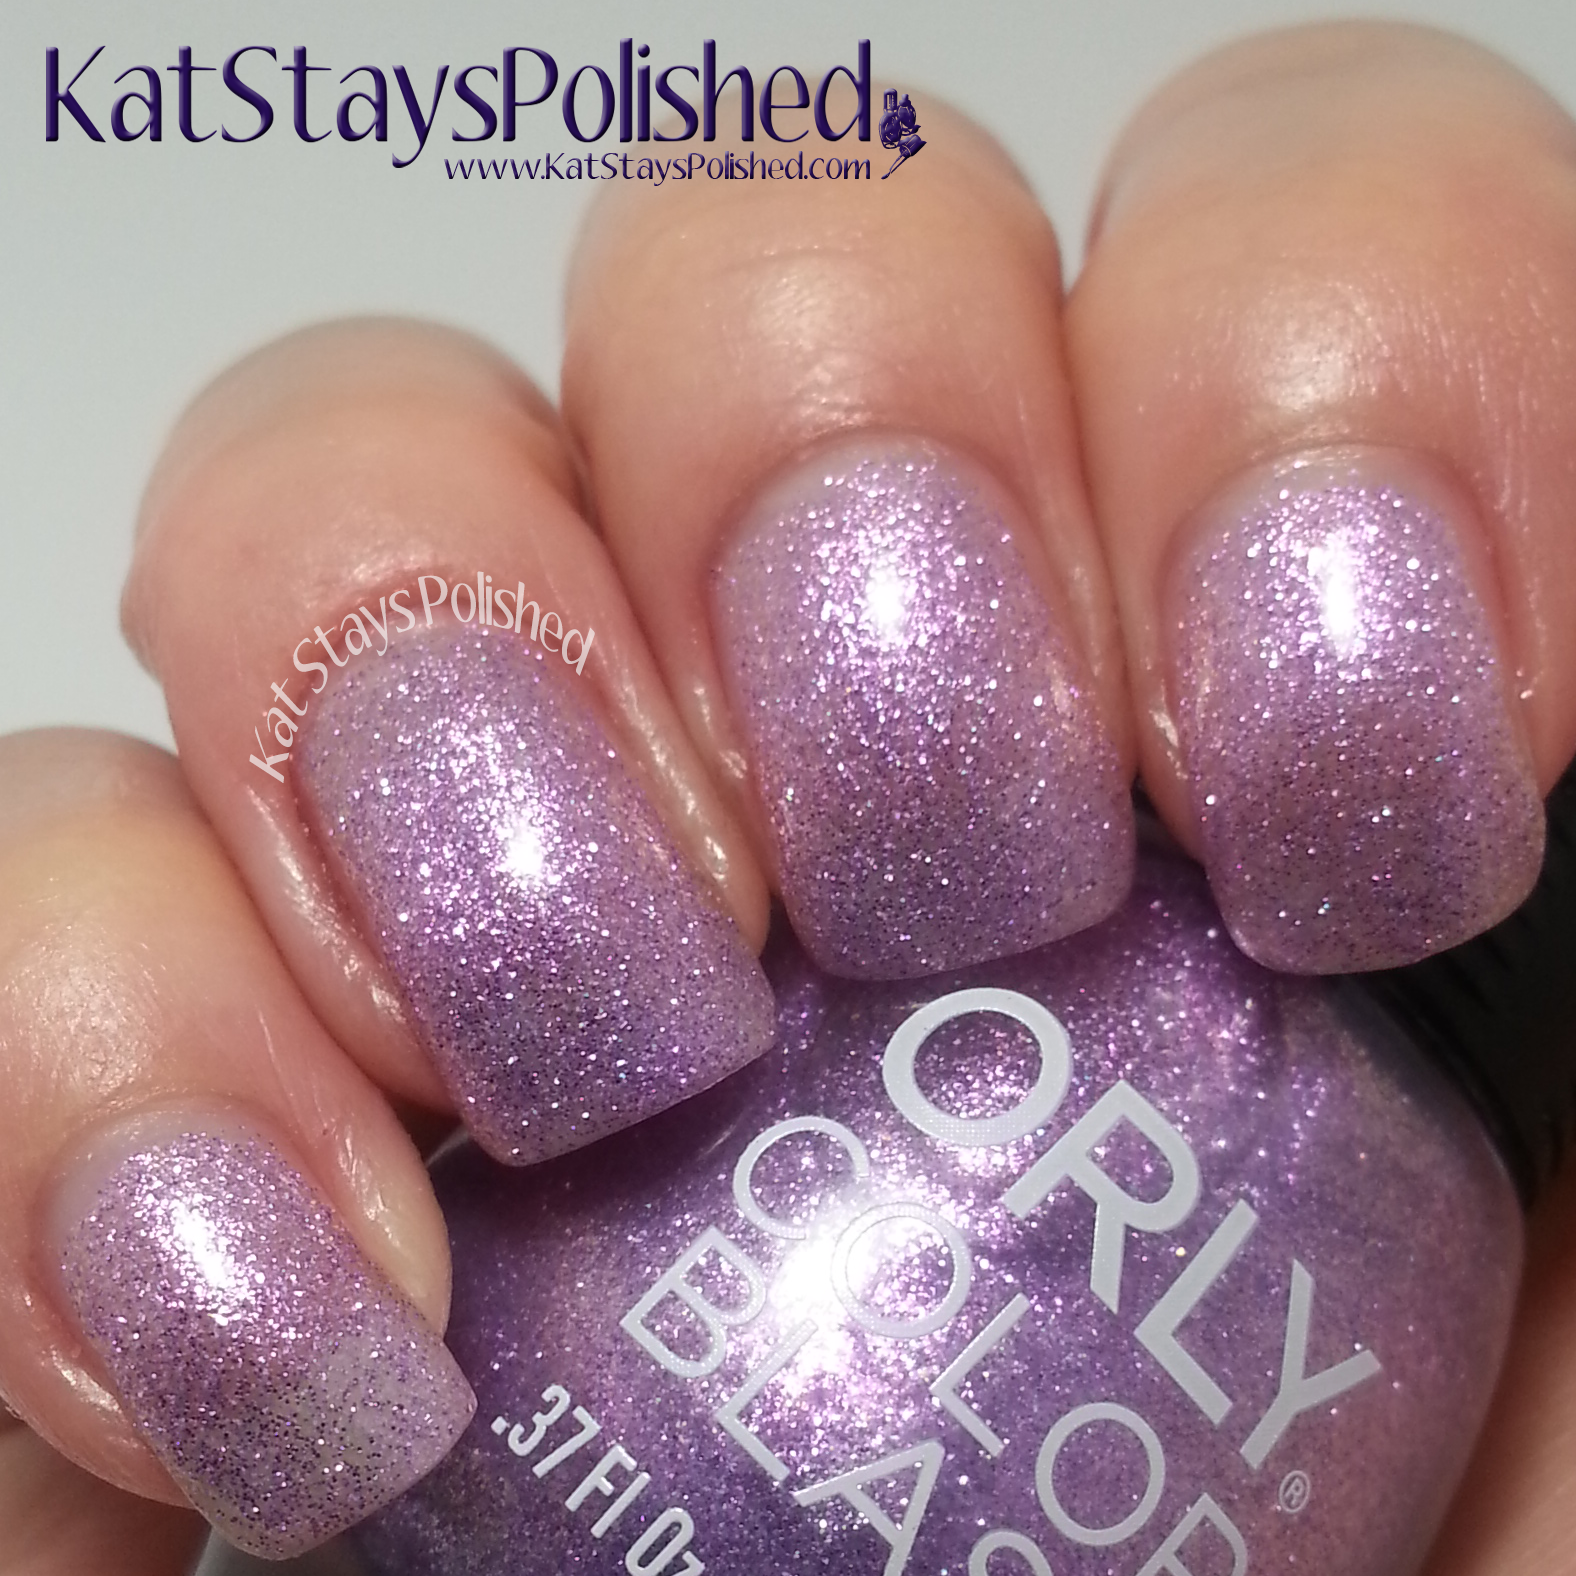 Orly Color Blast - Disney's Frozen Elsa Collection - Coronation Ball | Kat Stays Polished